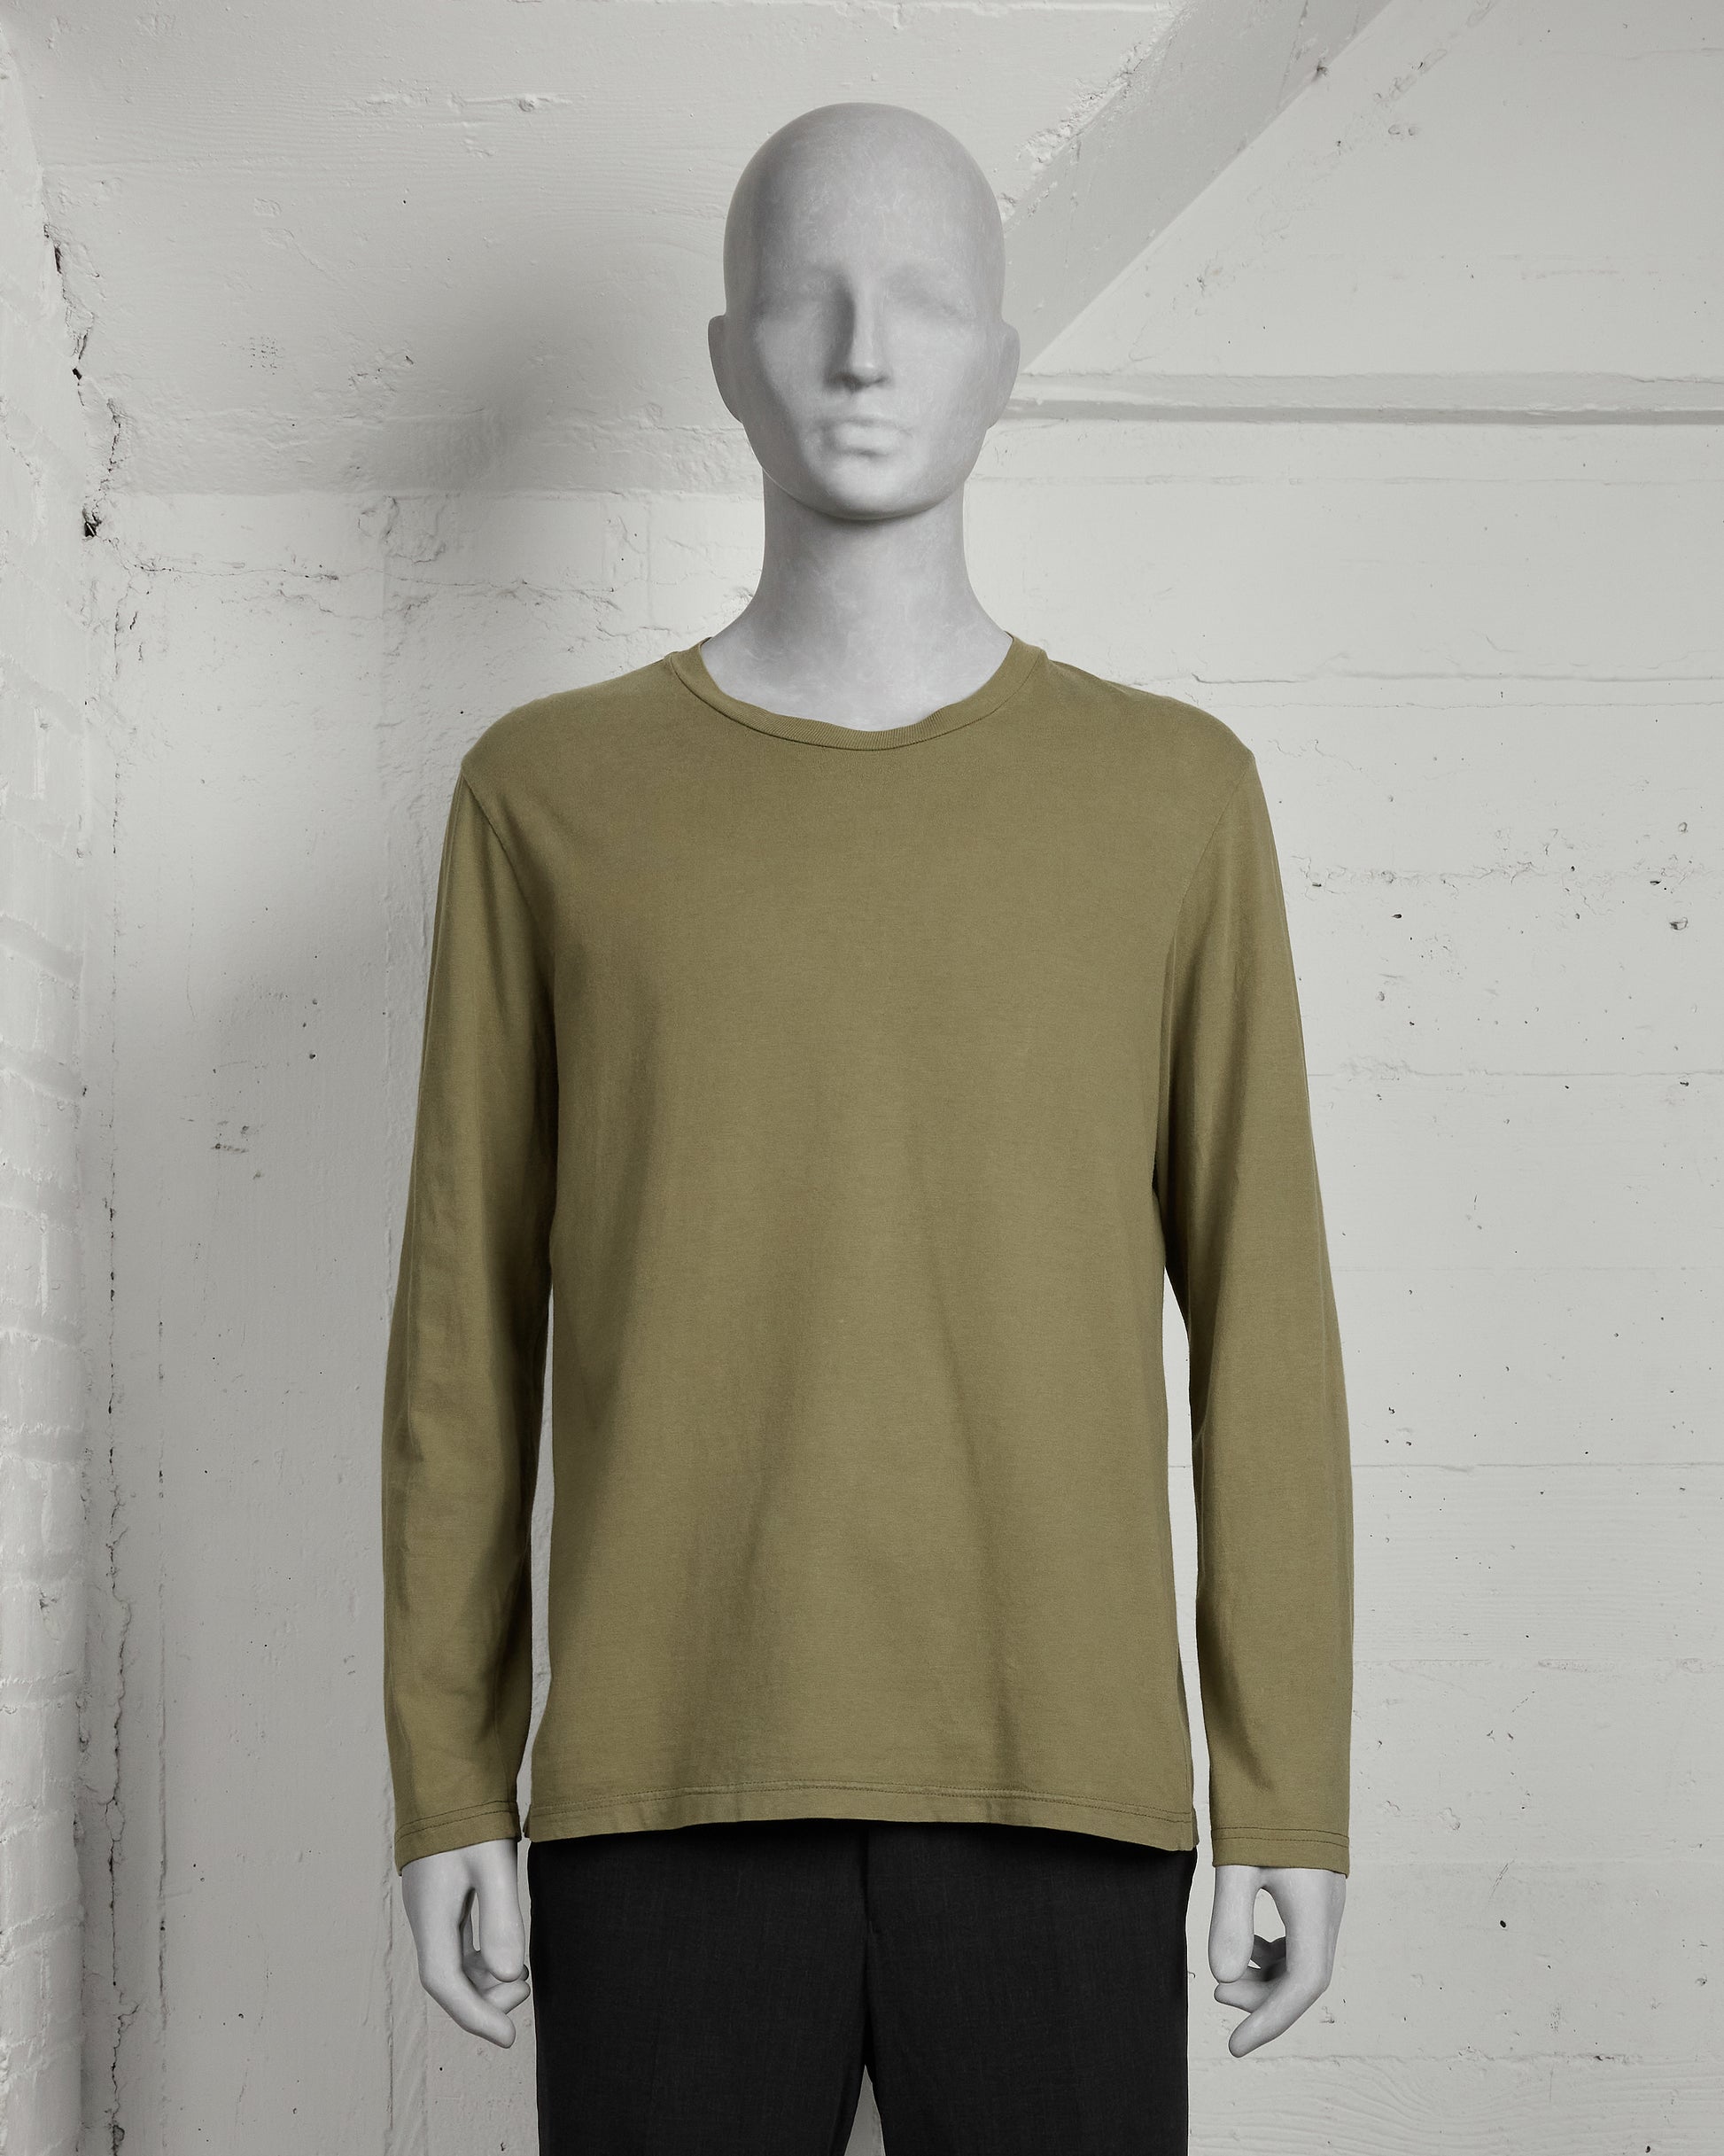 Helmut Lang Olive Long Sleeve Tee - 1990s - SILVER LEAGUE